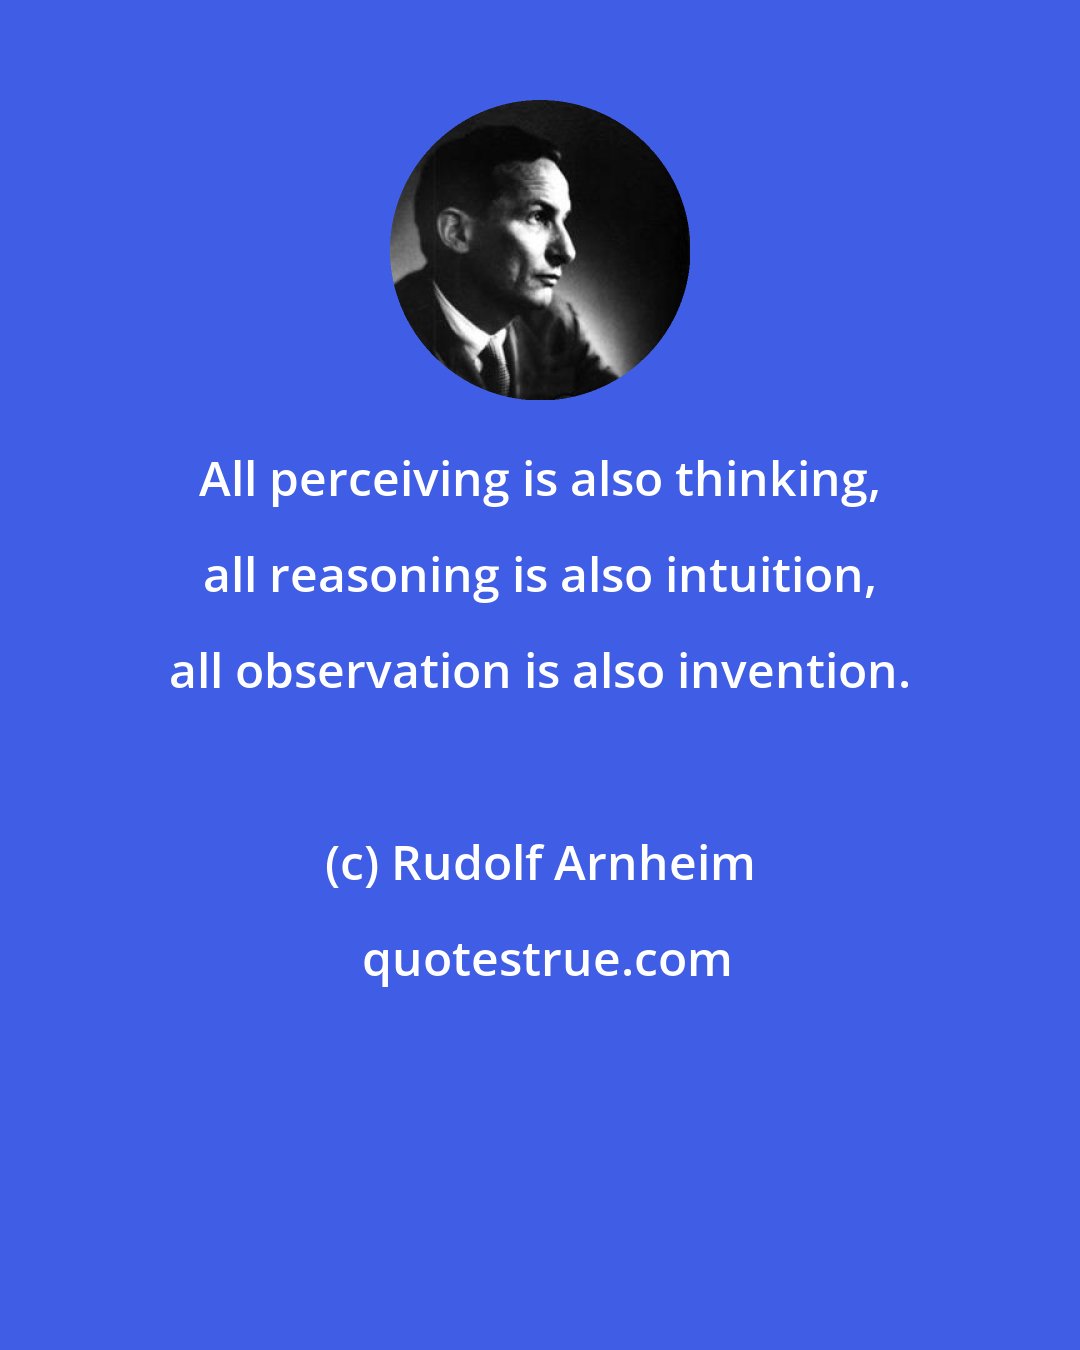 Rudolf Arnheim: All perceiving is also thinking, all reasoning is also intuition, all observation is also invention.